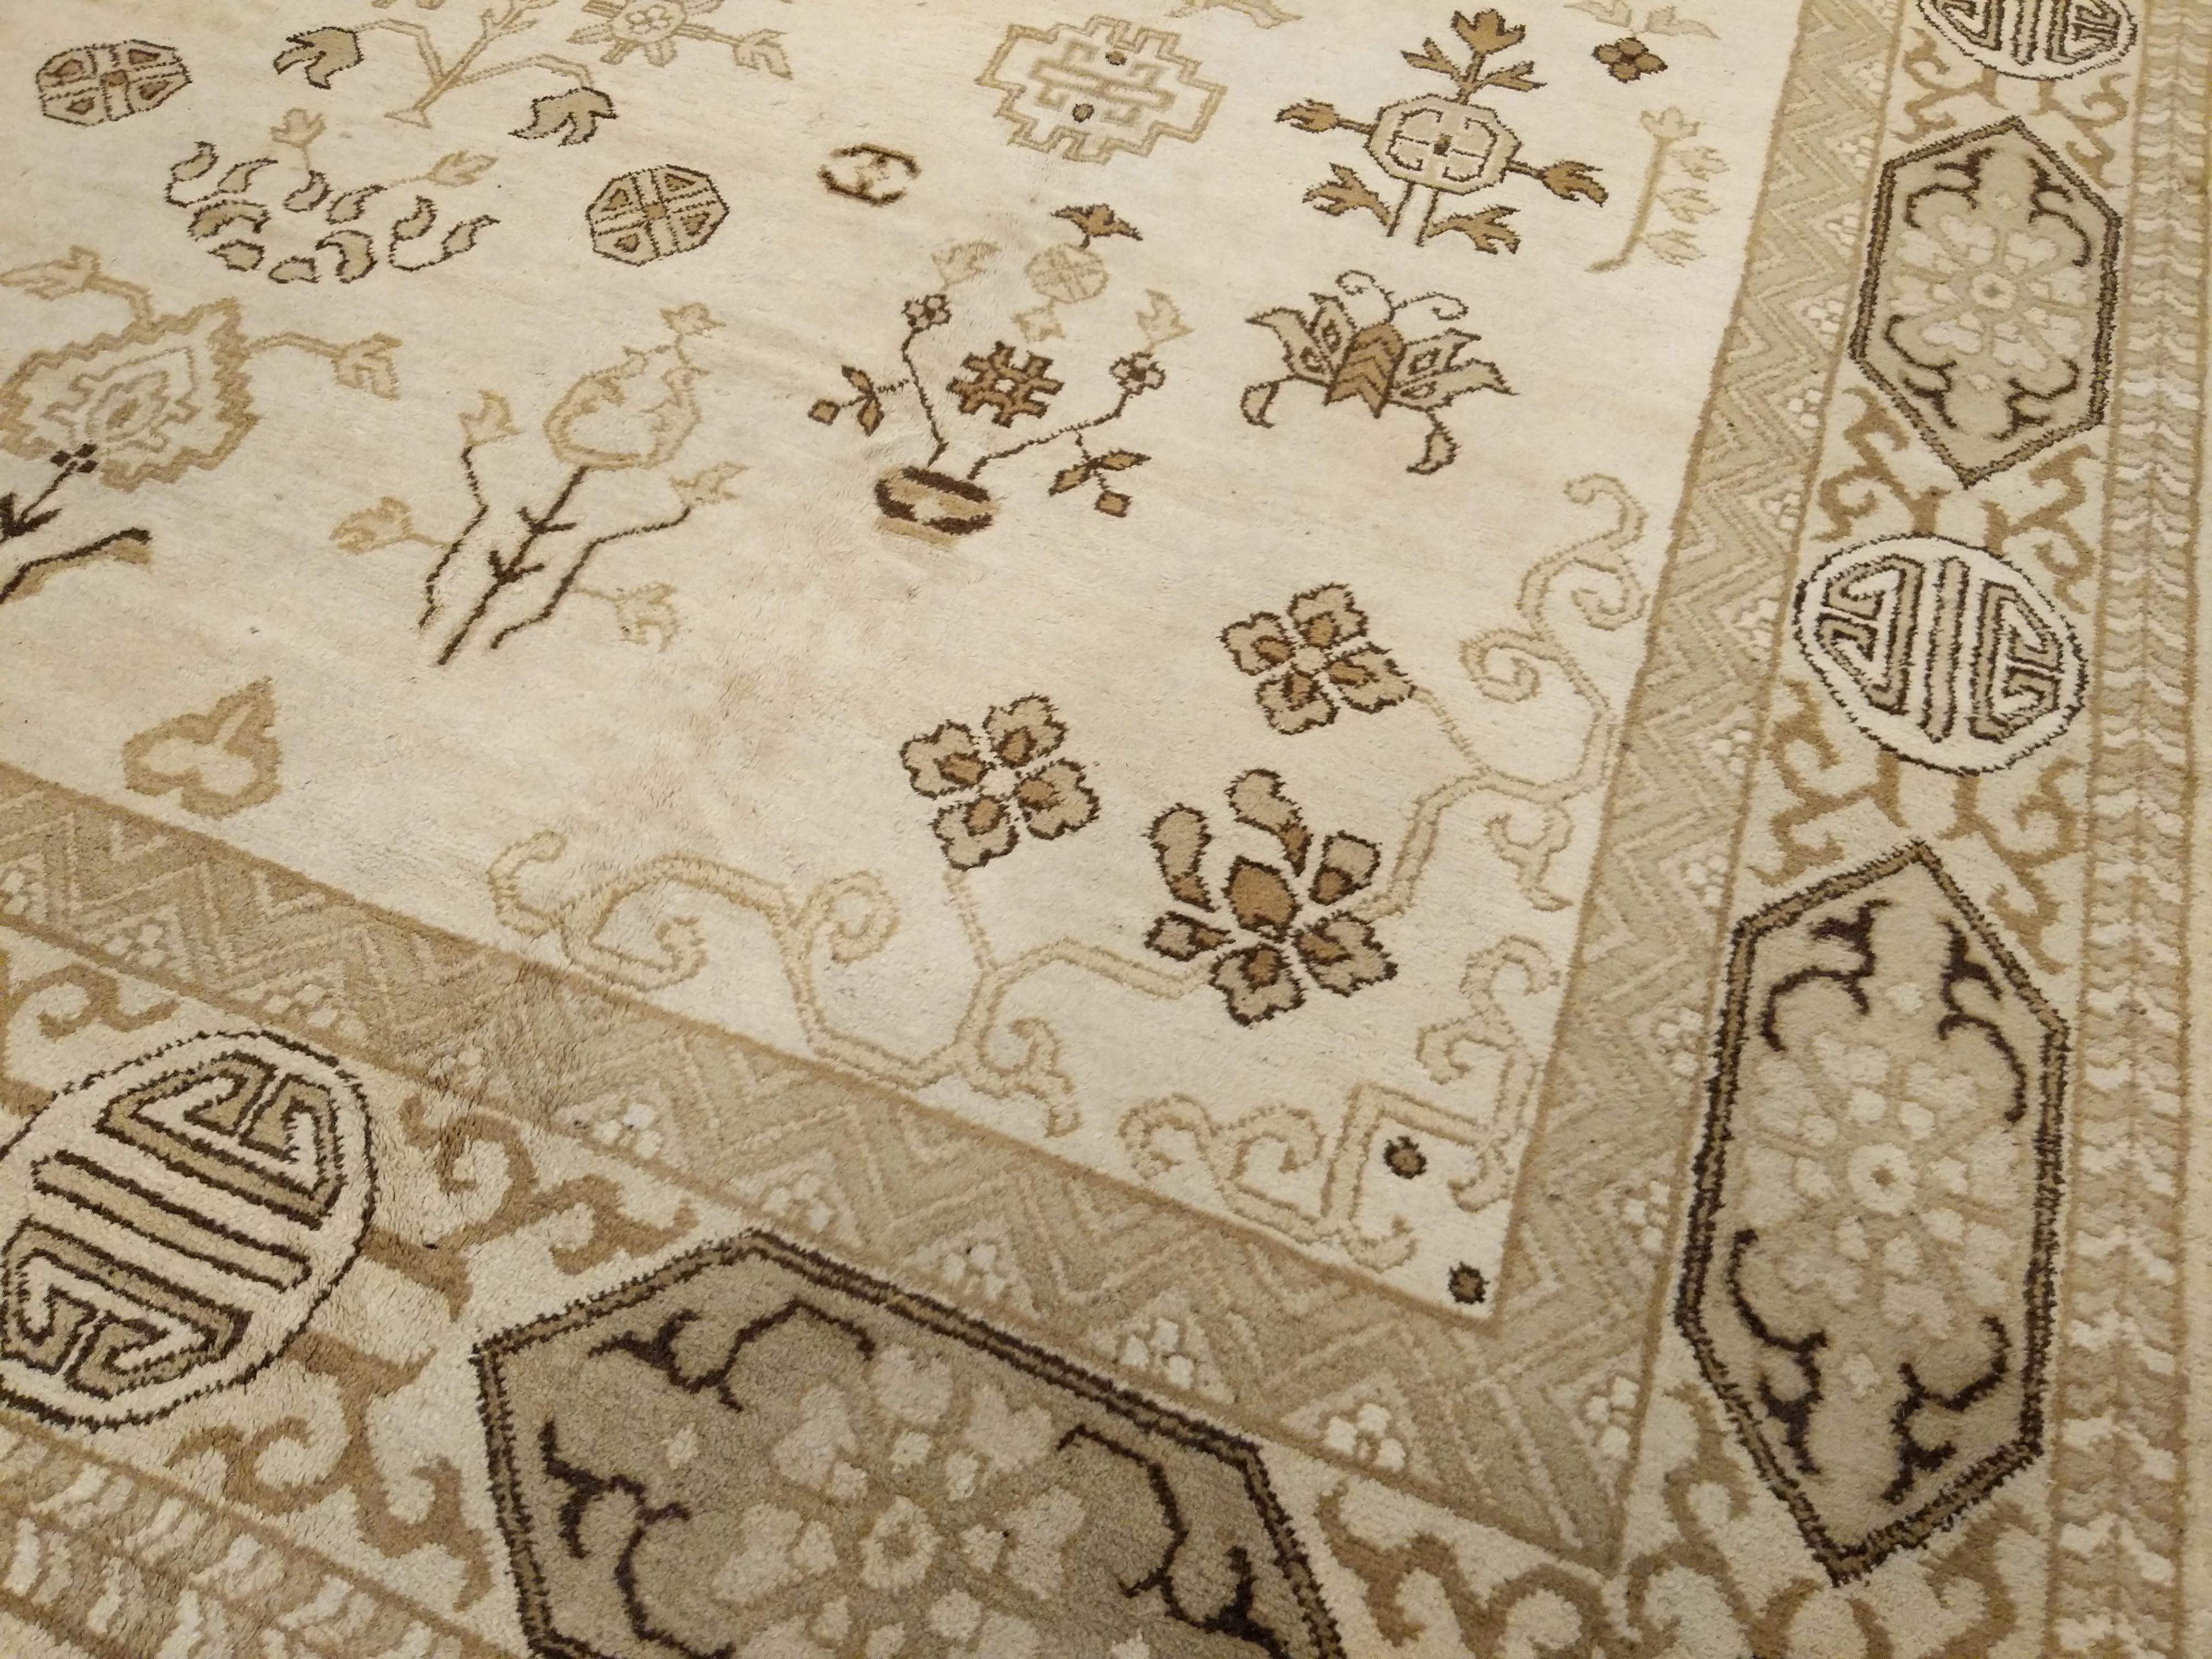 A specific cluster of northern Indian rugs are inspired by antique Chinese weavings, and are often referred to as Indochine. Here wee see a very subtle palette on an ivory background, with a pattern that sits exactly in balance between China and